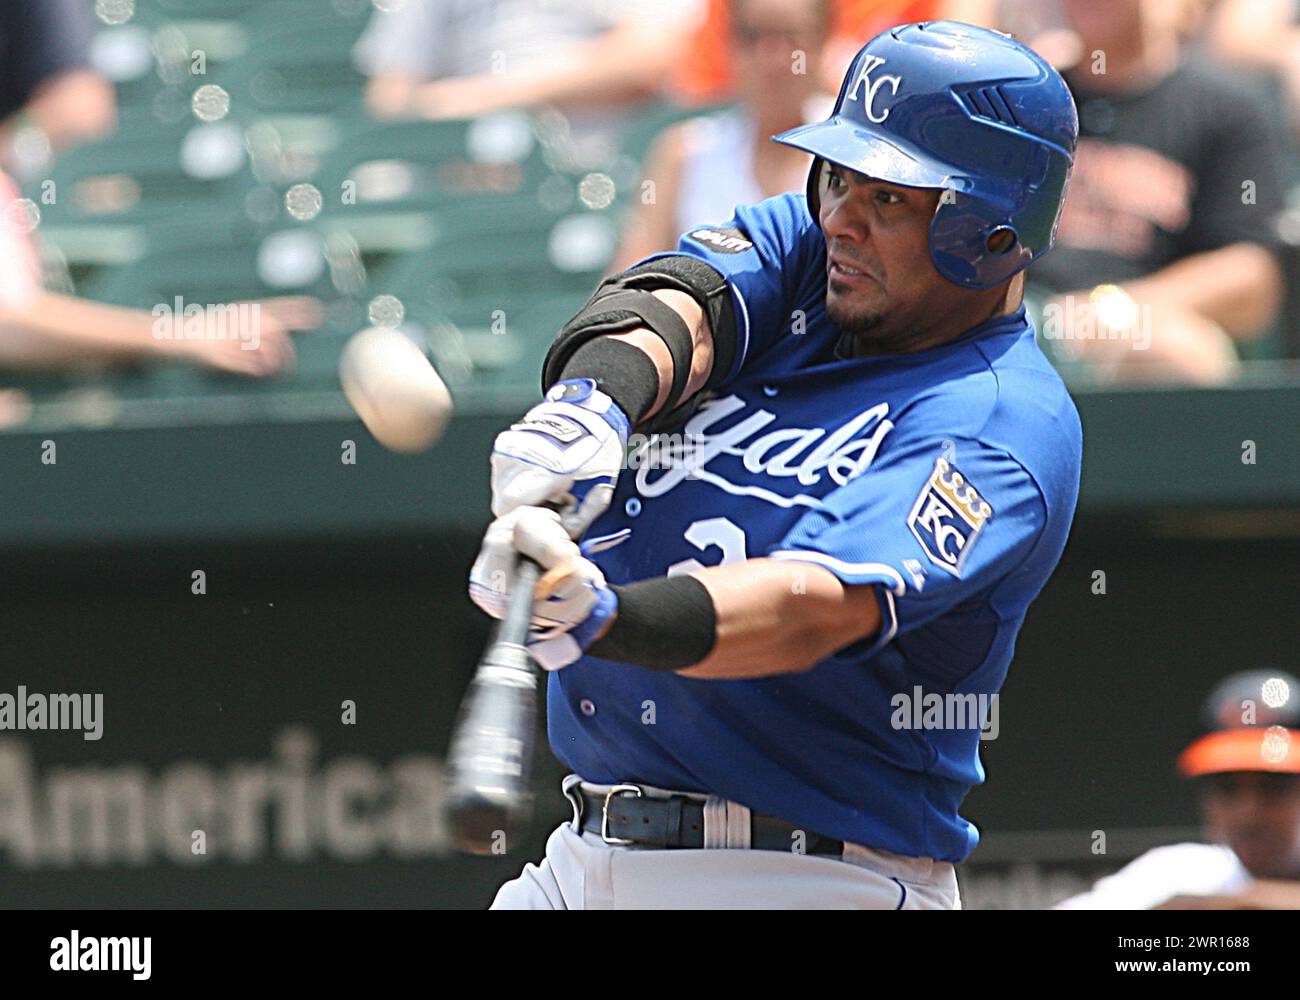 MAY 26 2011: Brayan Pena (27) of the Kansas City Royals makes contact during an American League baseball game against the Baltimore Orioles at Camden Yards in Baltimore, Maryland.Orioles won 6-5 after 12 innings. Stock Photo